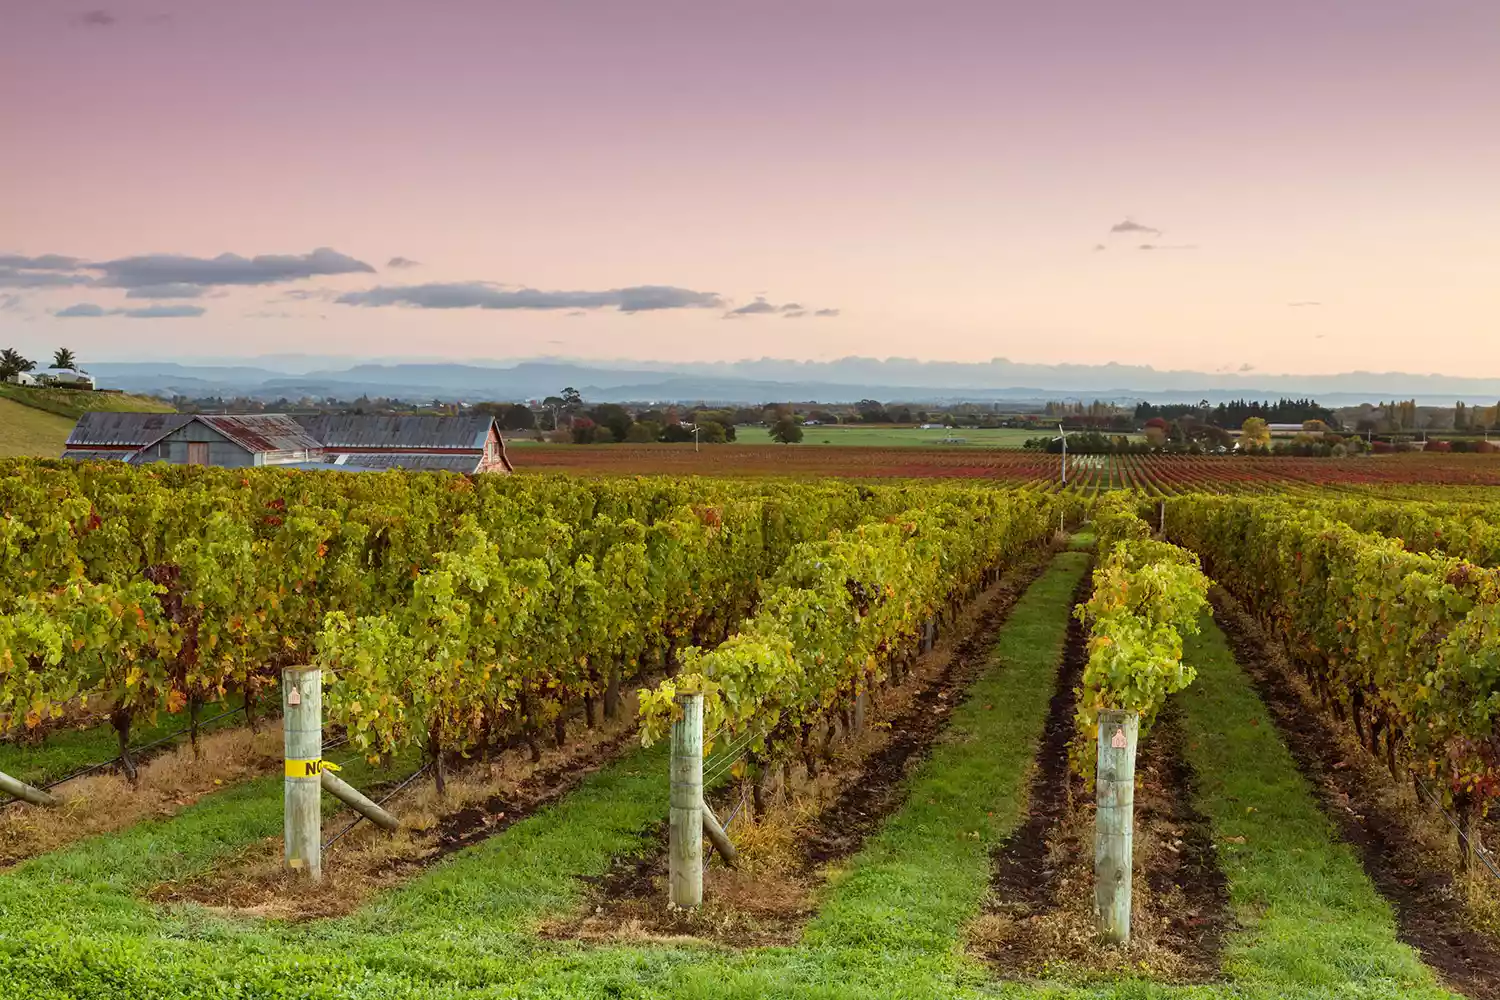 7 New Zealand Locations Locals Love, From Vineyards and Lakes to Spectacular Islands